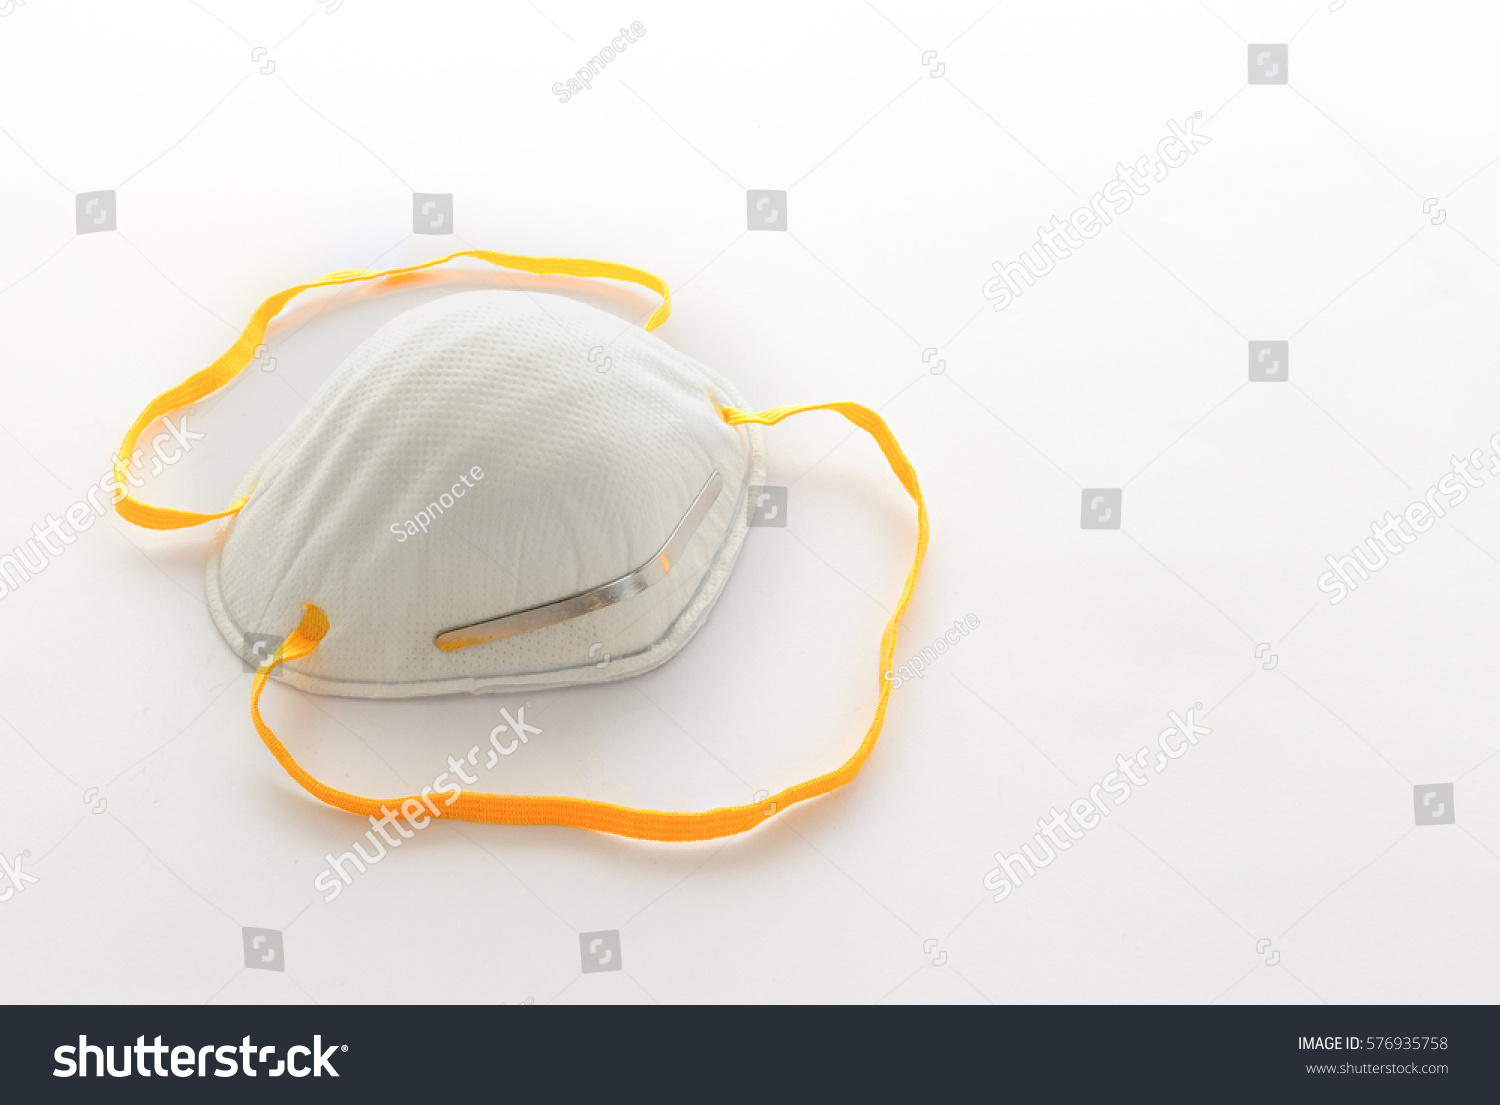 Protective face mask on a white background #576935758